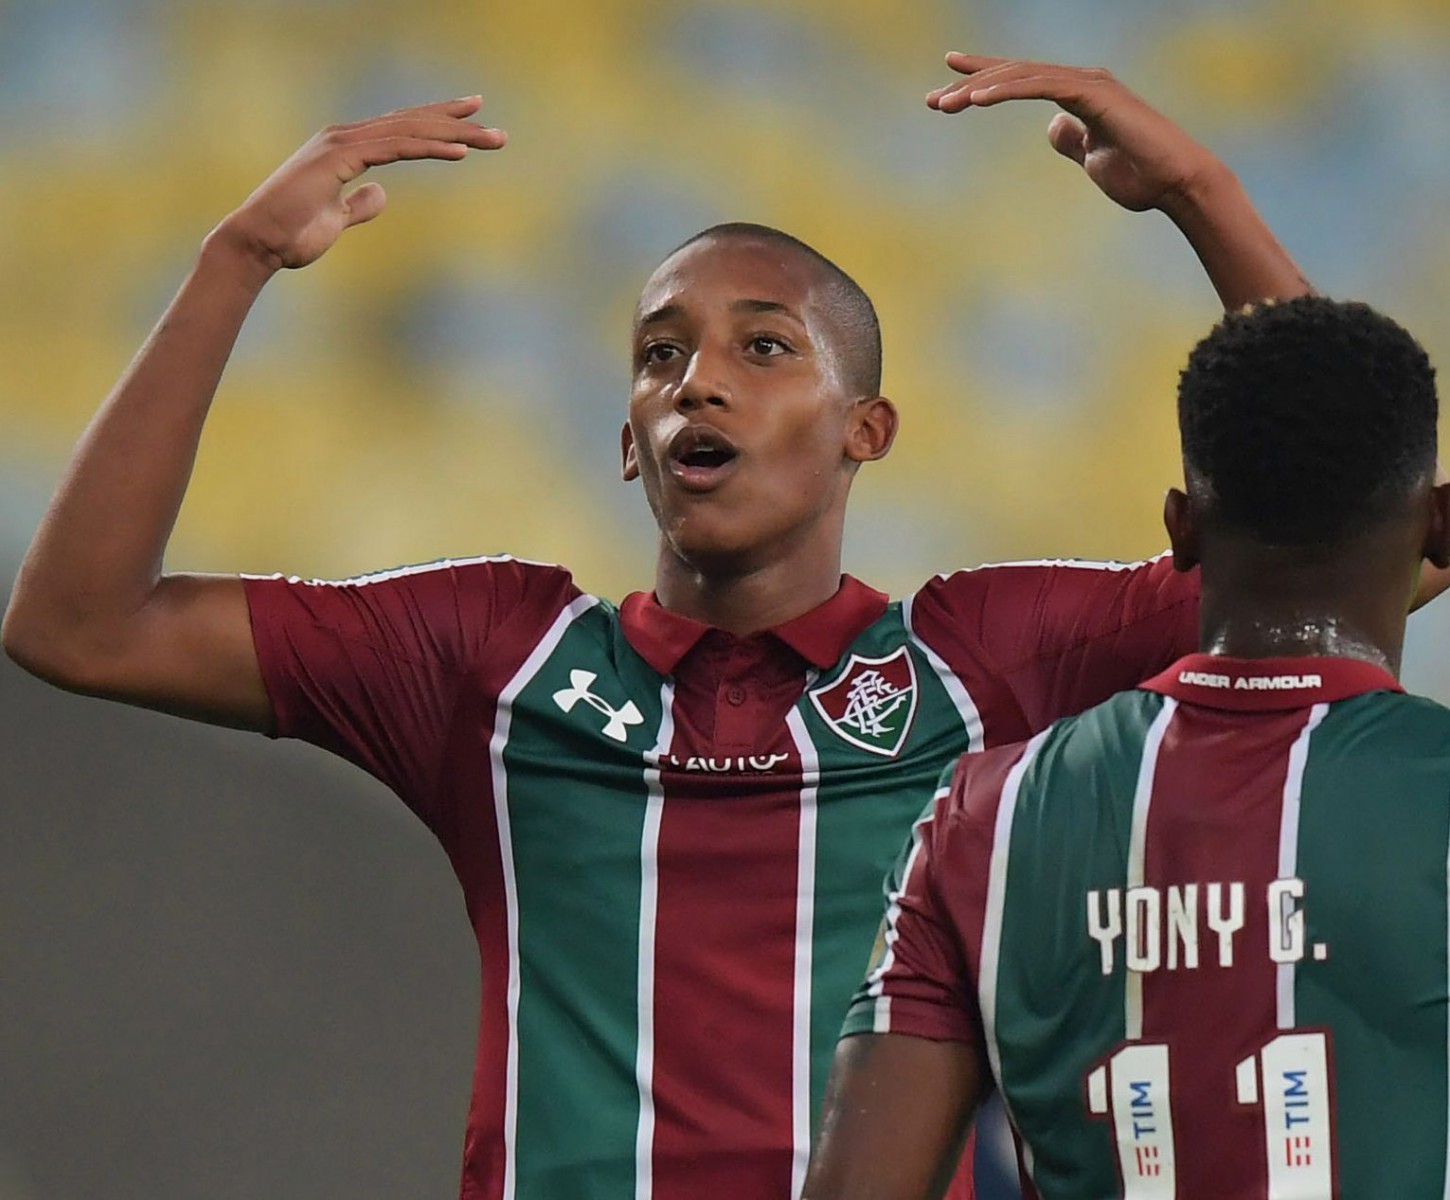 Pedro is struggling for form at Fluminense ahead of his big-money move to the Premier League